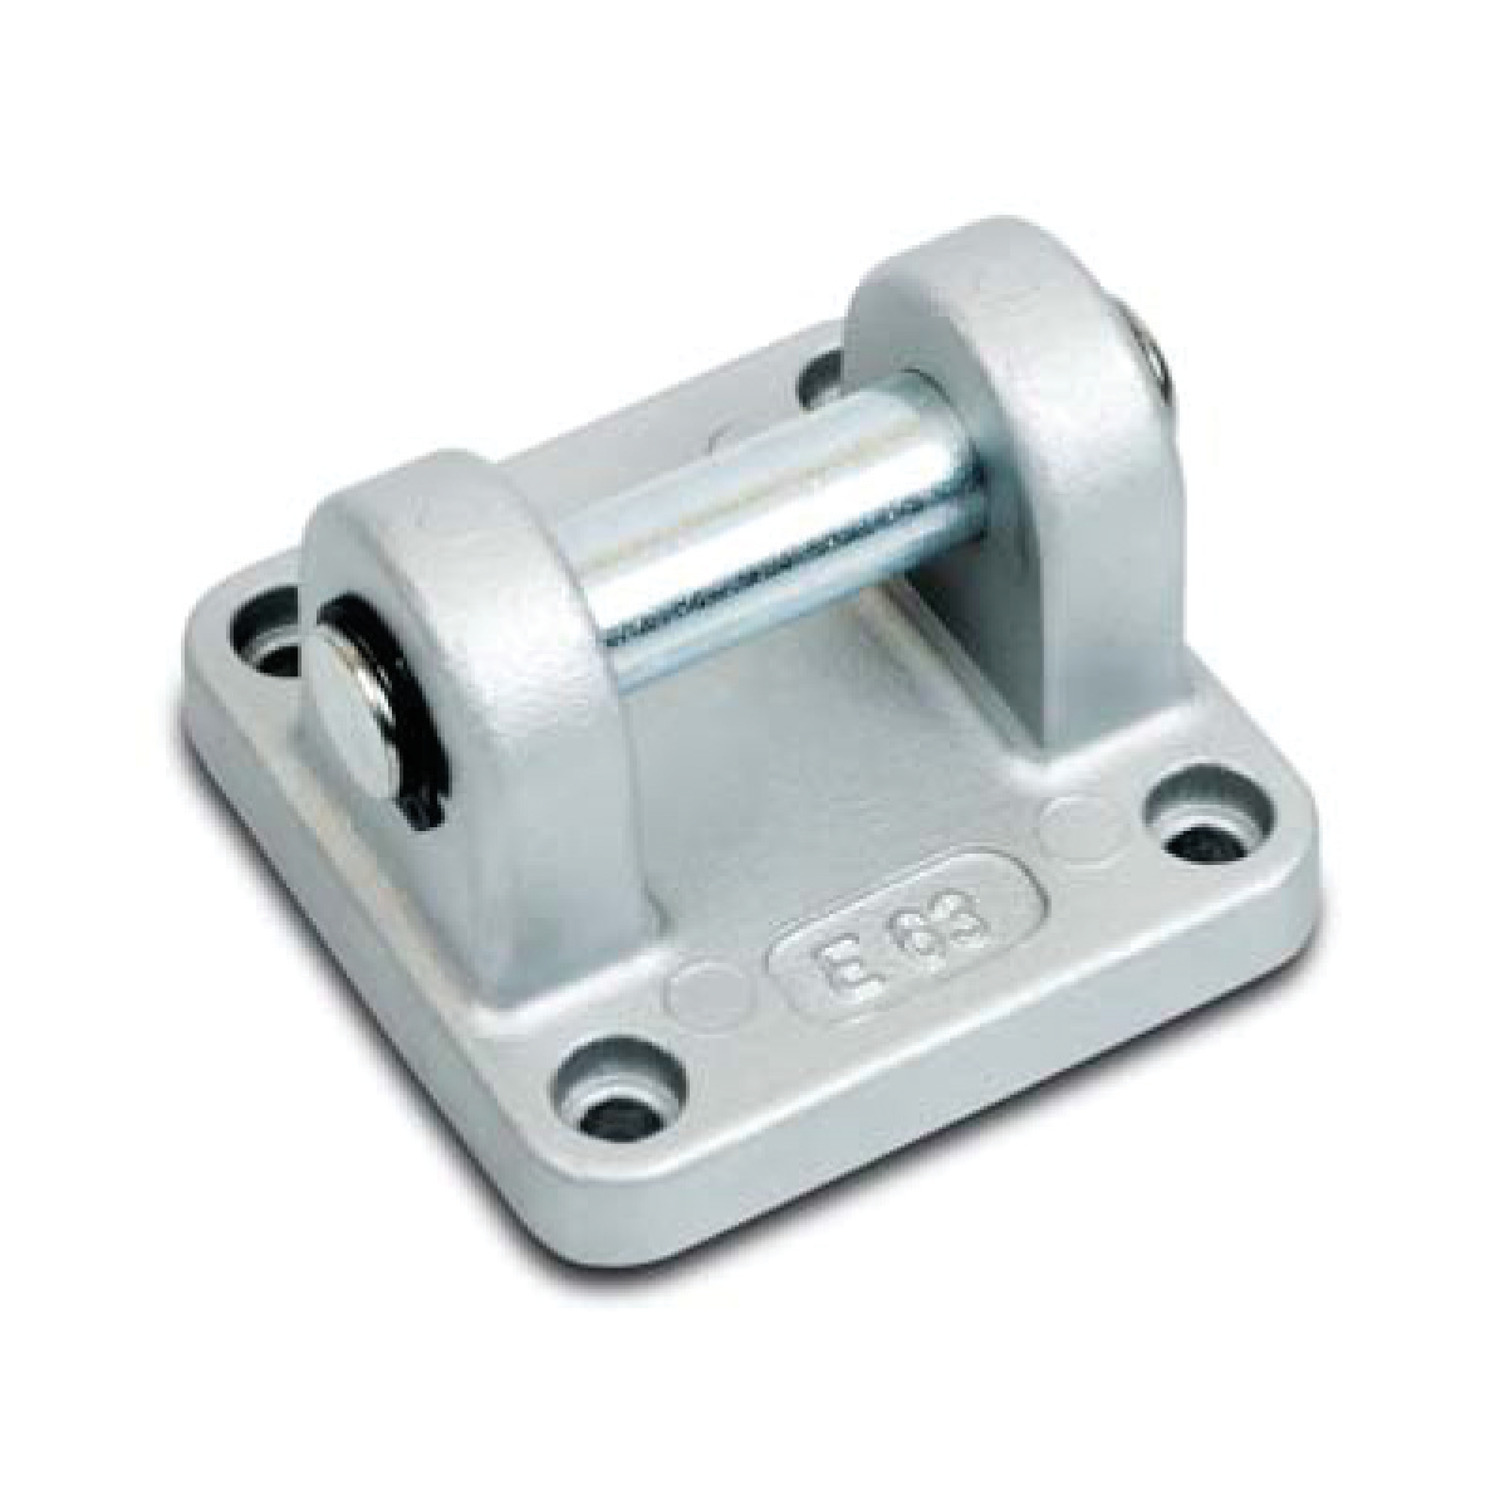 Product L4810, Air Cylinder Mounts - CETOP Series swivel flange / 